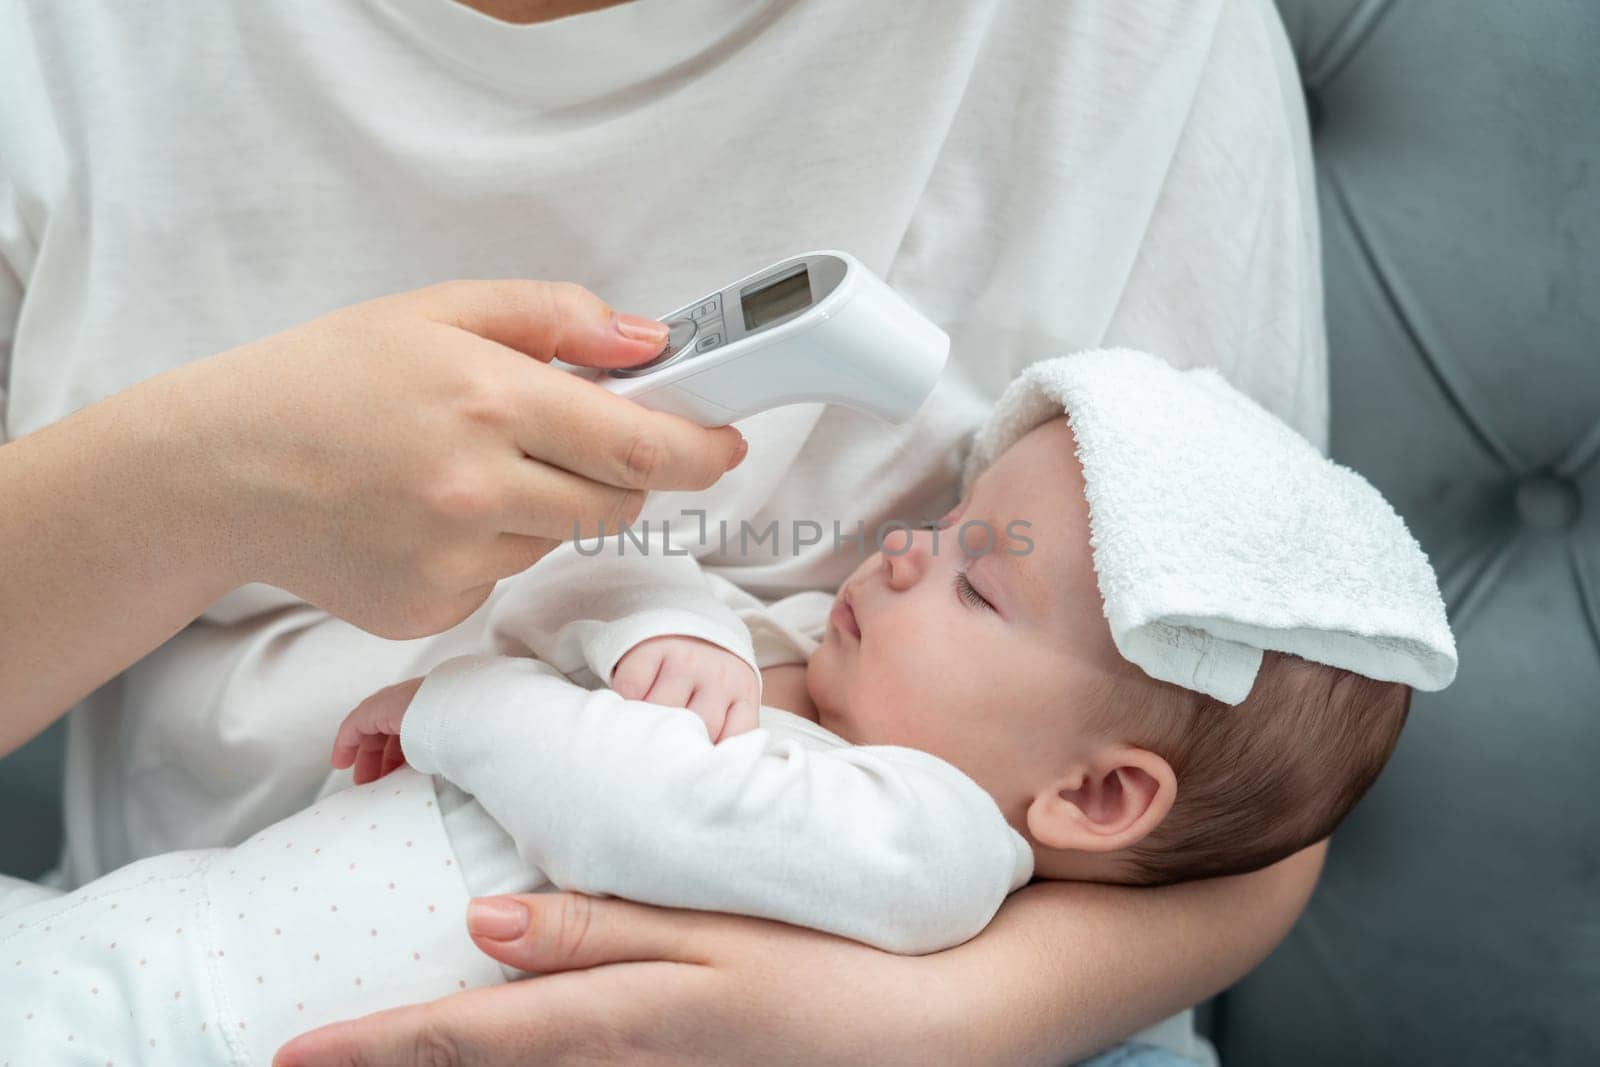 A woman adeptly measures her baby's forehead temperature, utilizing an electronic thermometer for